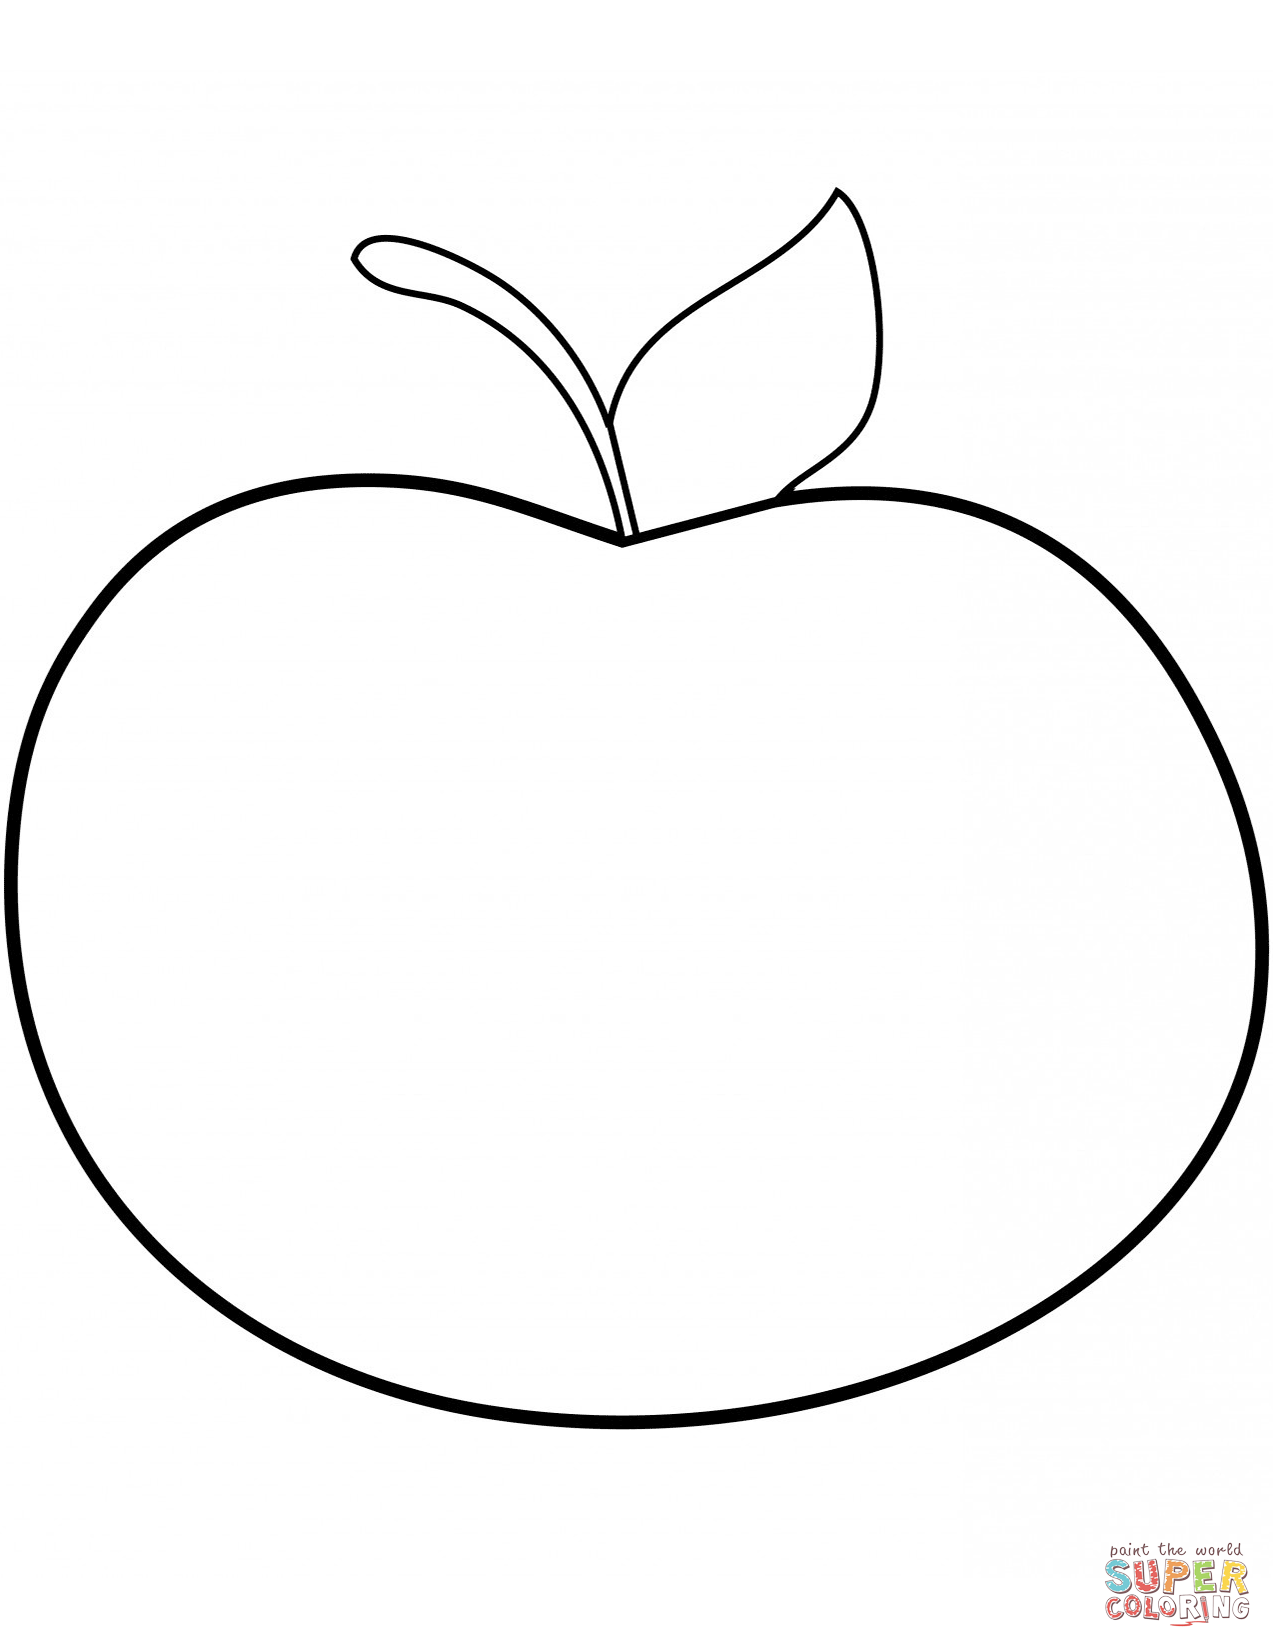 Fabulous Apple Coloring Pages With with HD Resolution 2046x1526 ...